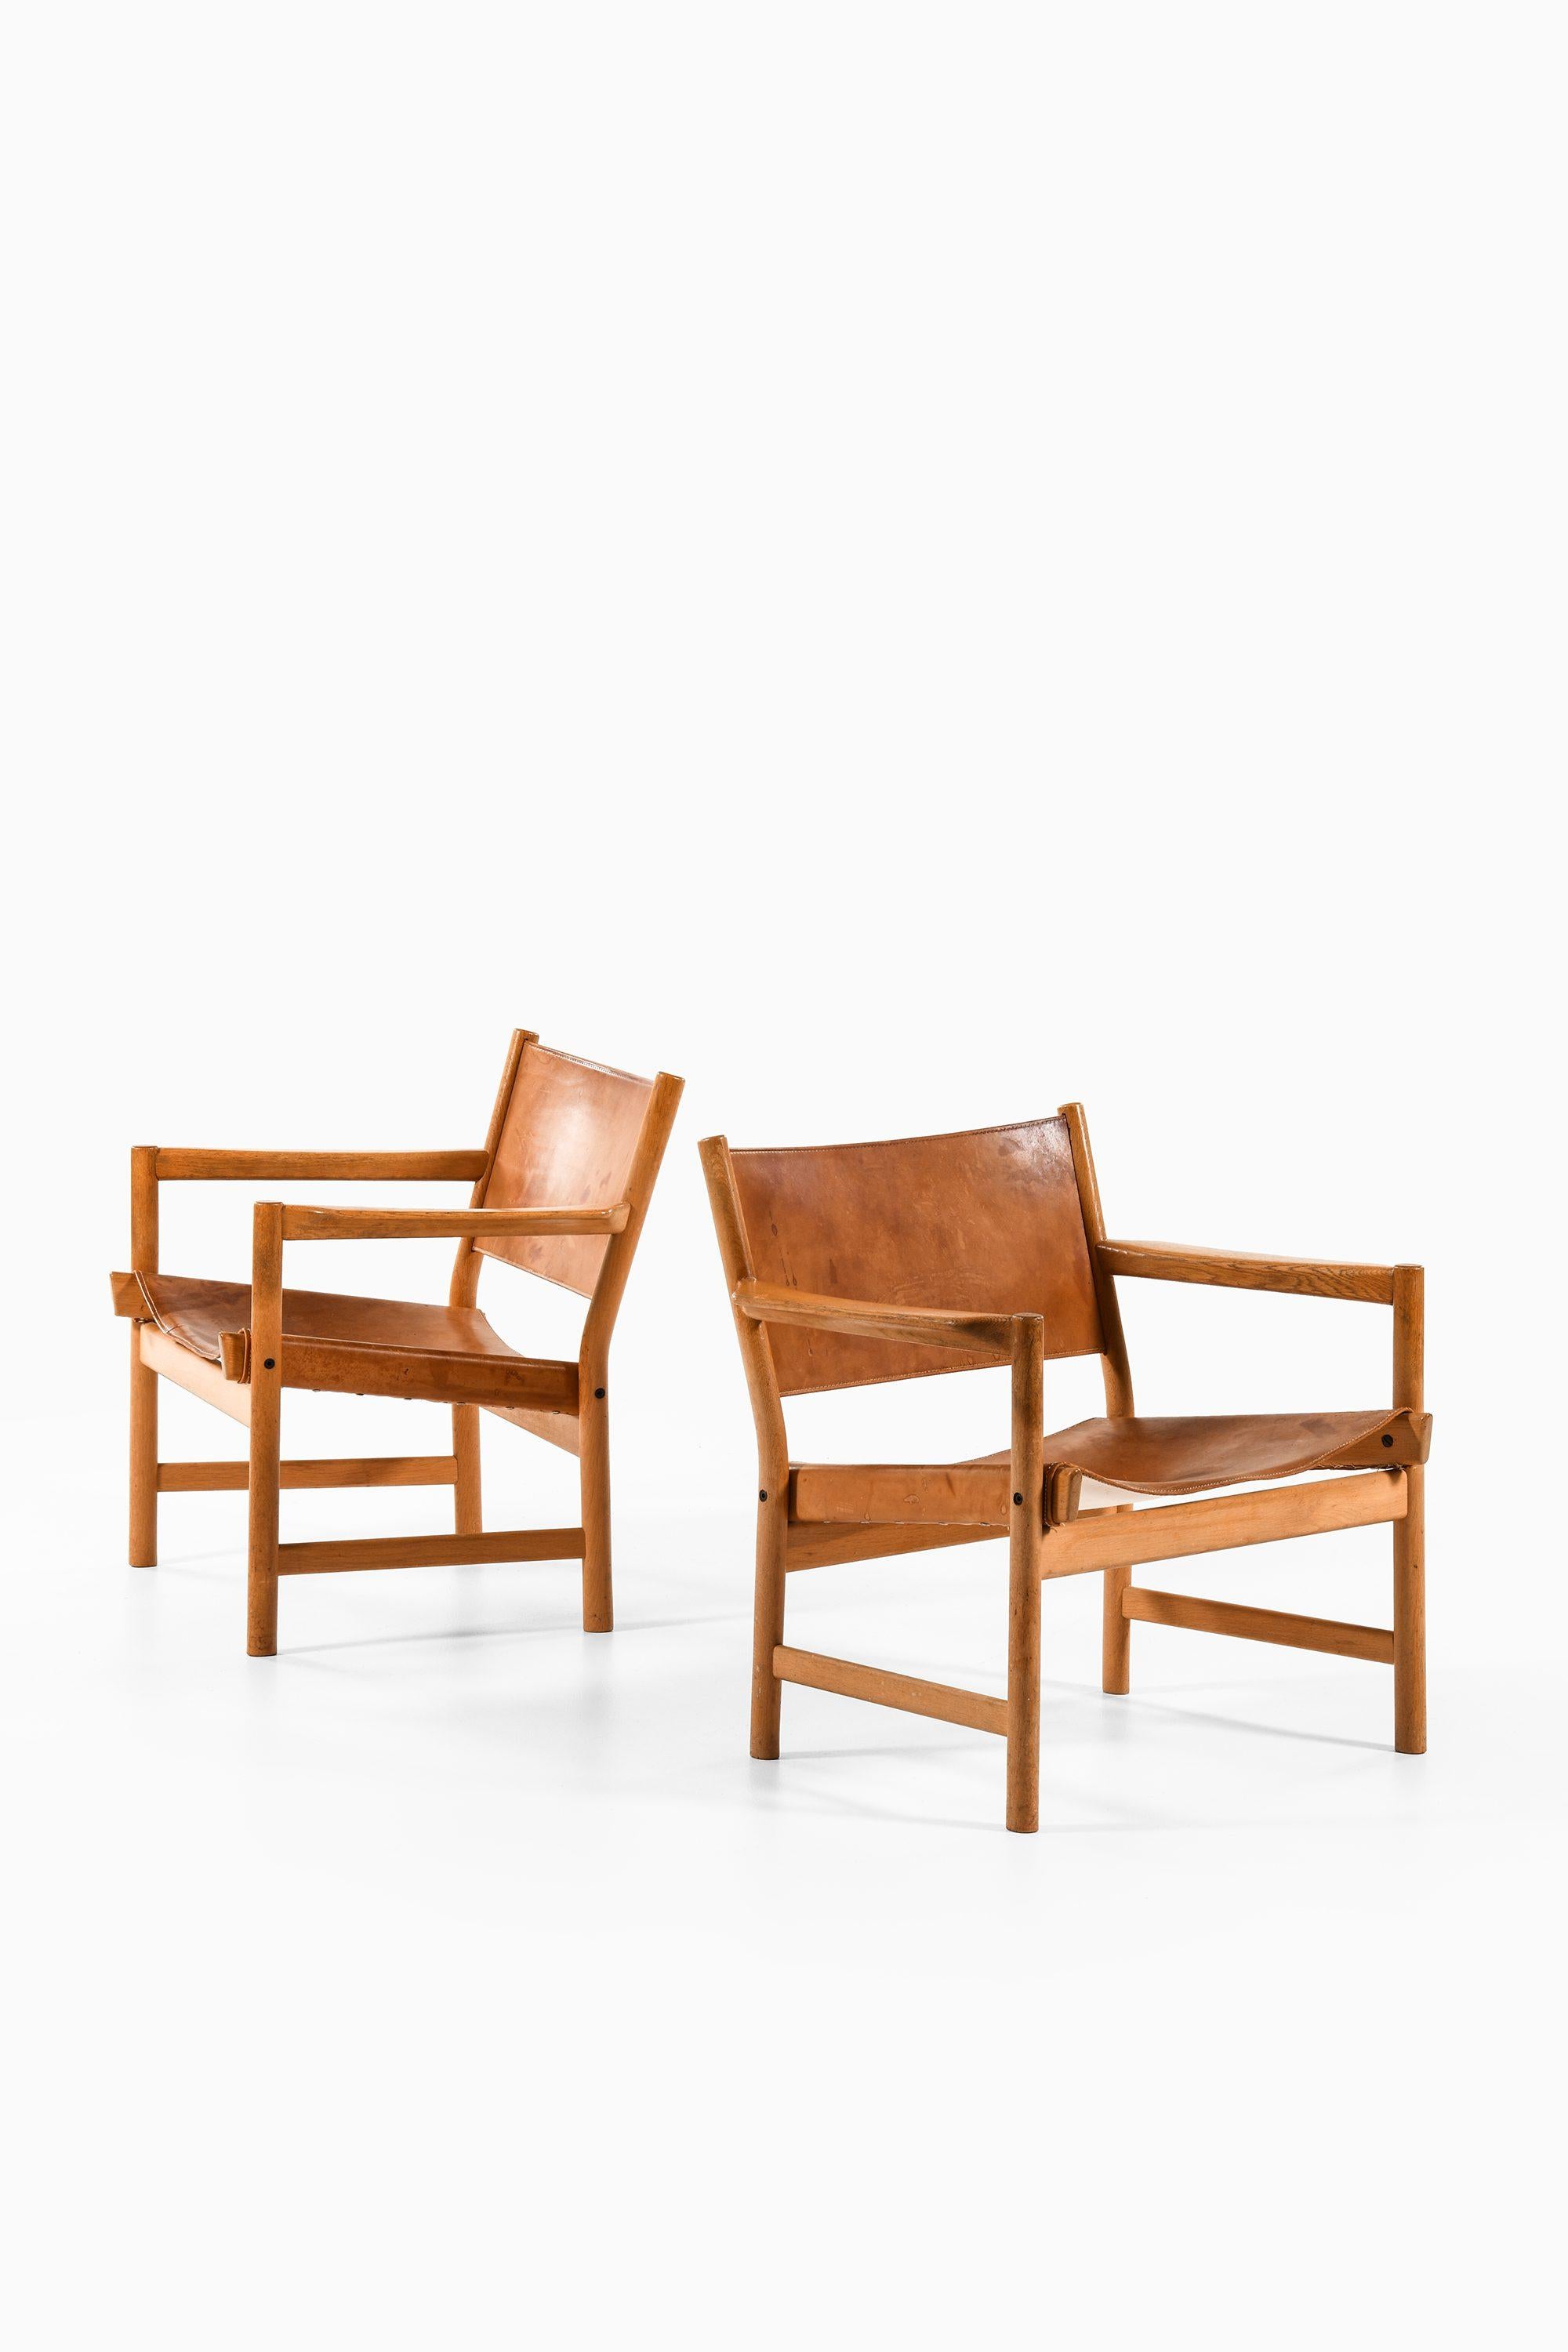 Rare Pair of Easy Chairs / safari chairs in Oak and Leather, 1960's

Additional Information:
Material: Oak and leather
Style: Mid century, Scandinavia
Probably produced in Denmark
Dimensions (W x D x H): 72 x 65 x 71 cm
Seat Height: 35 cm
Condition: